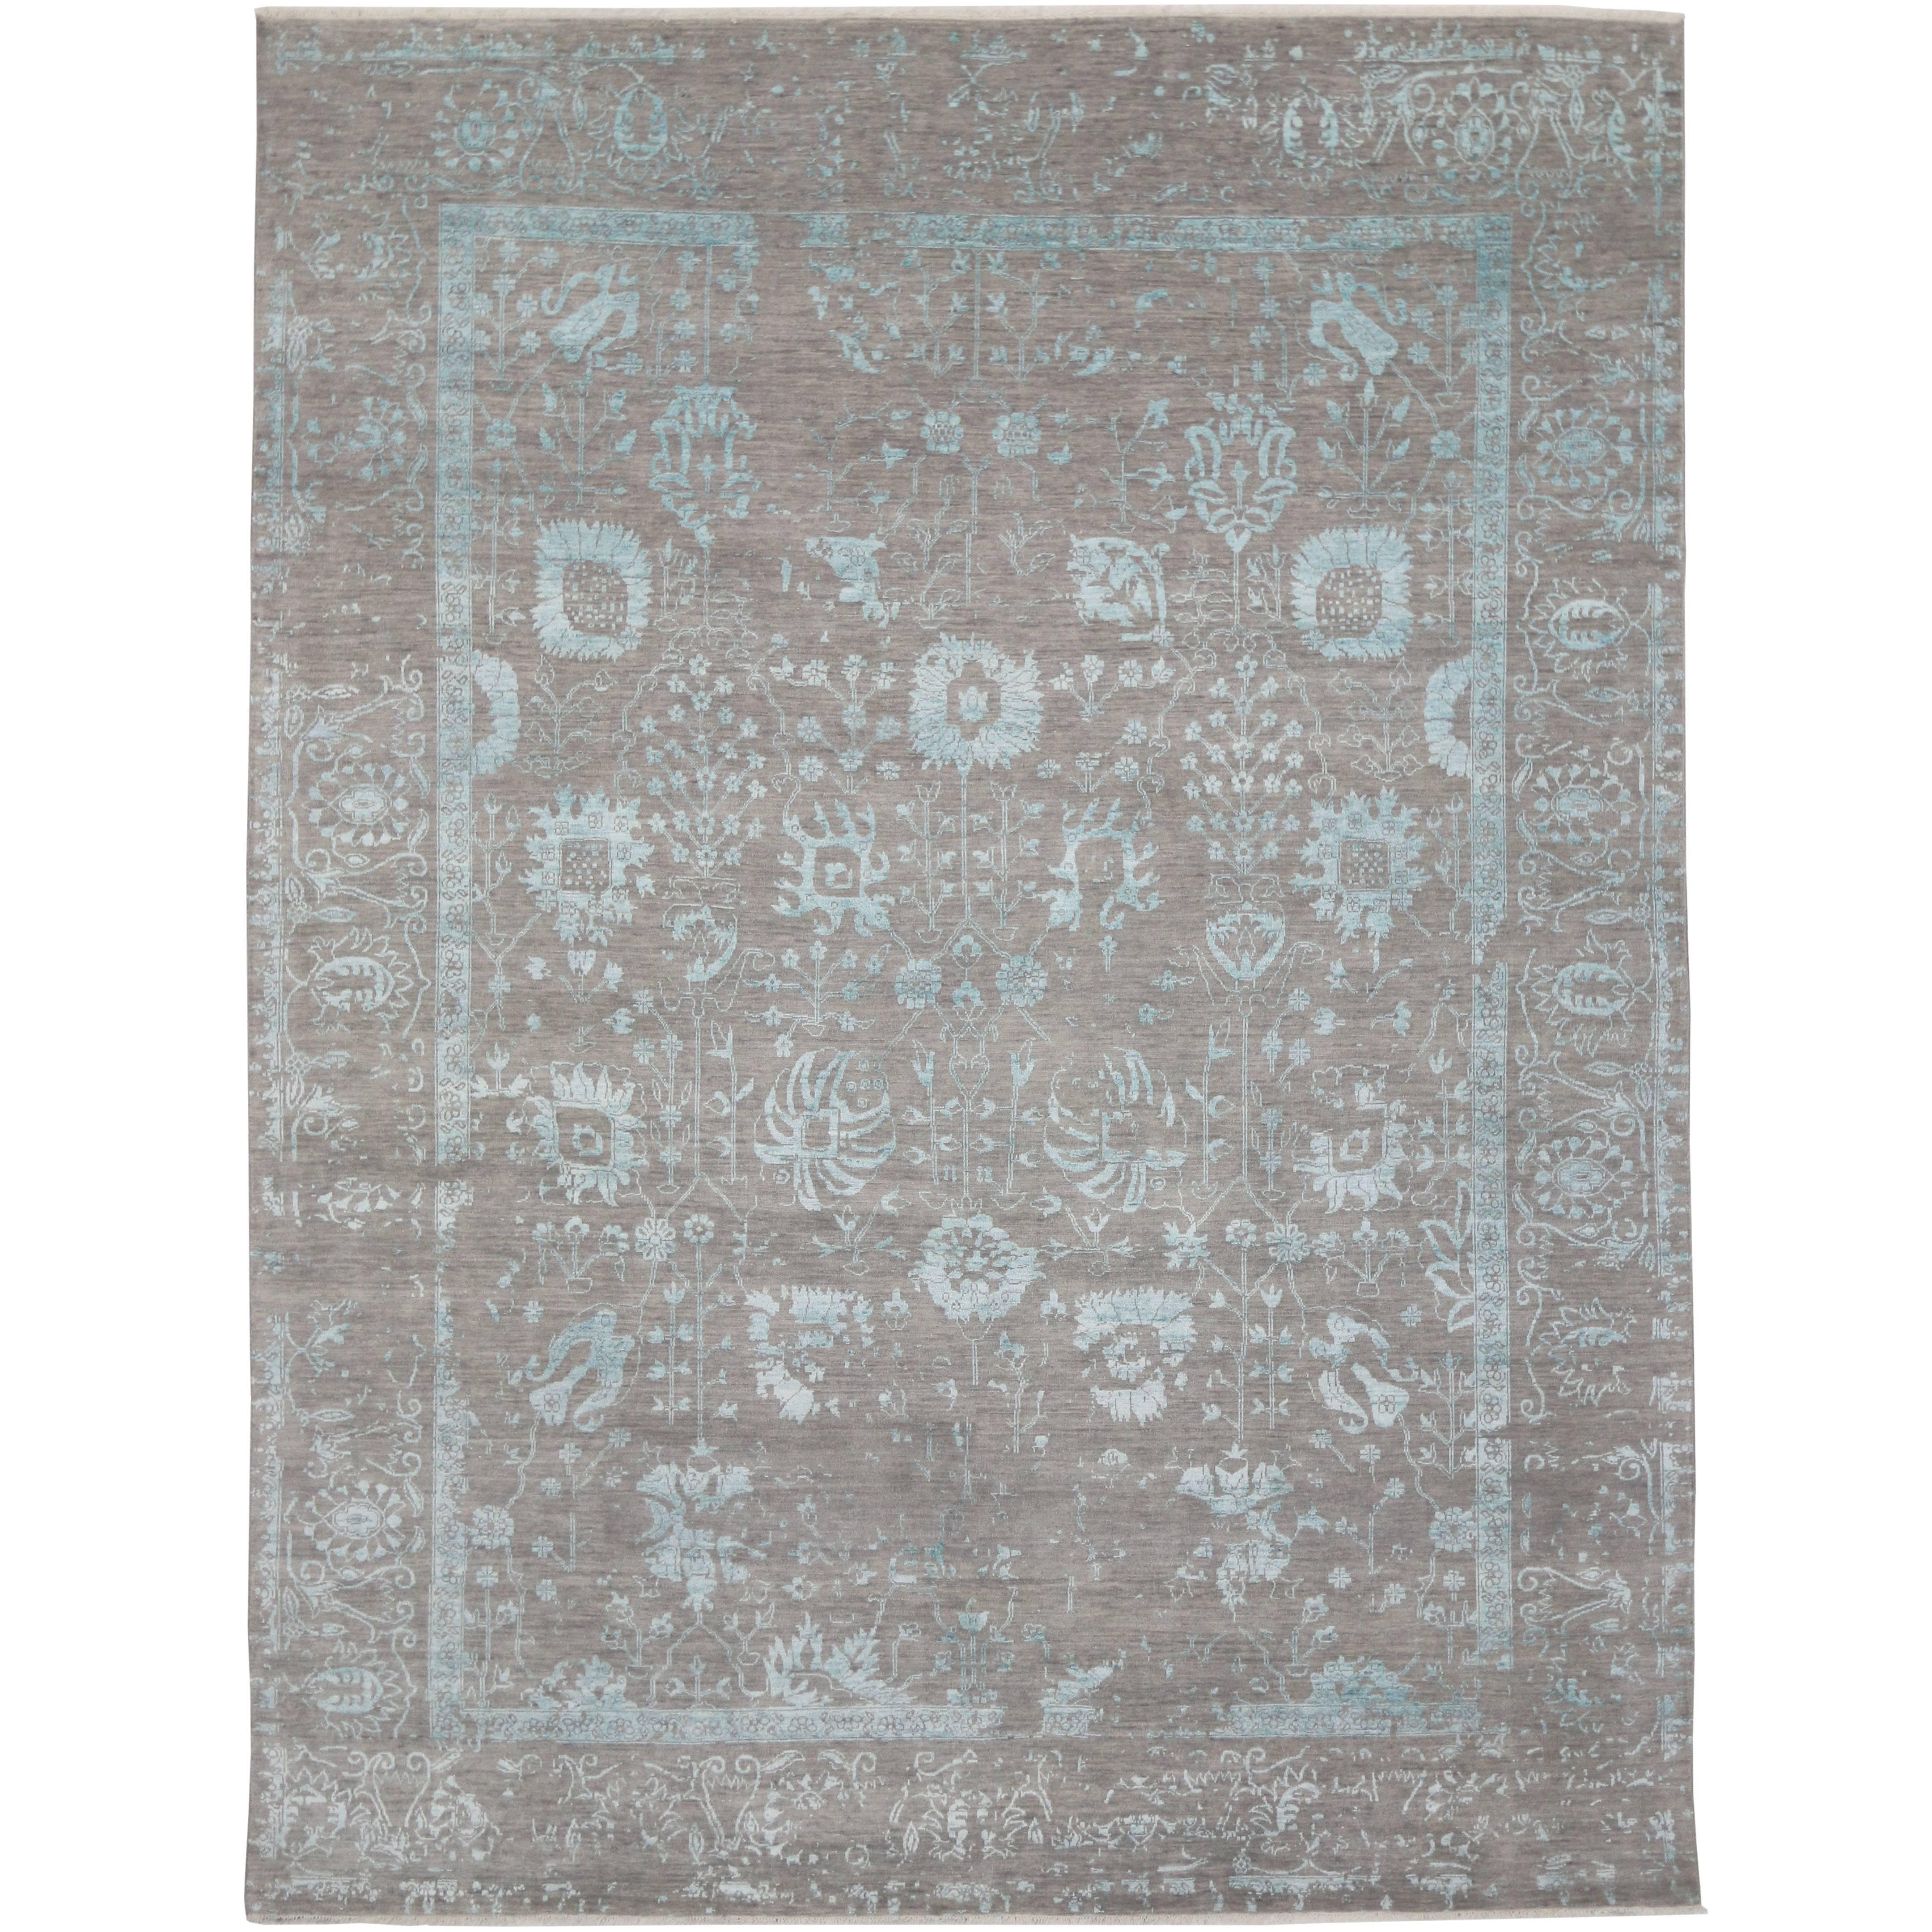 Contemporary Gray Oushak Rug with Erased Design and Modern, Abstract Style